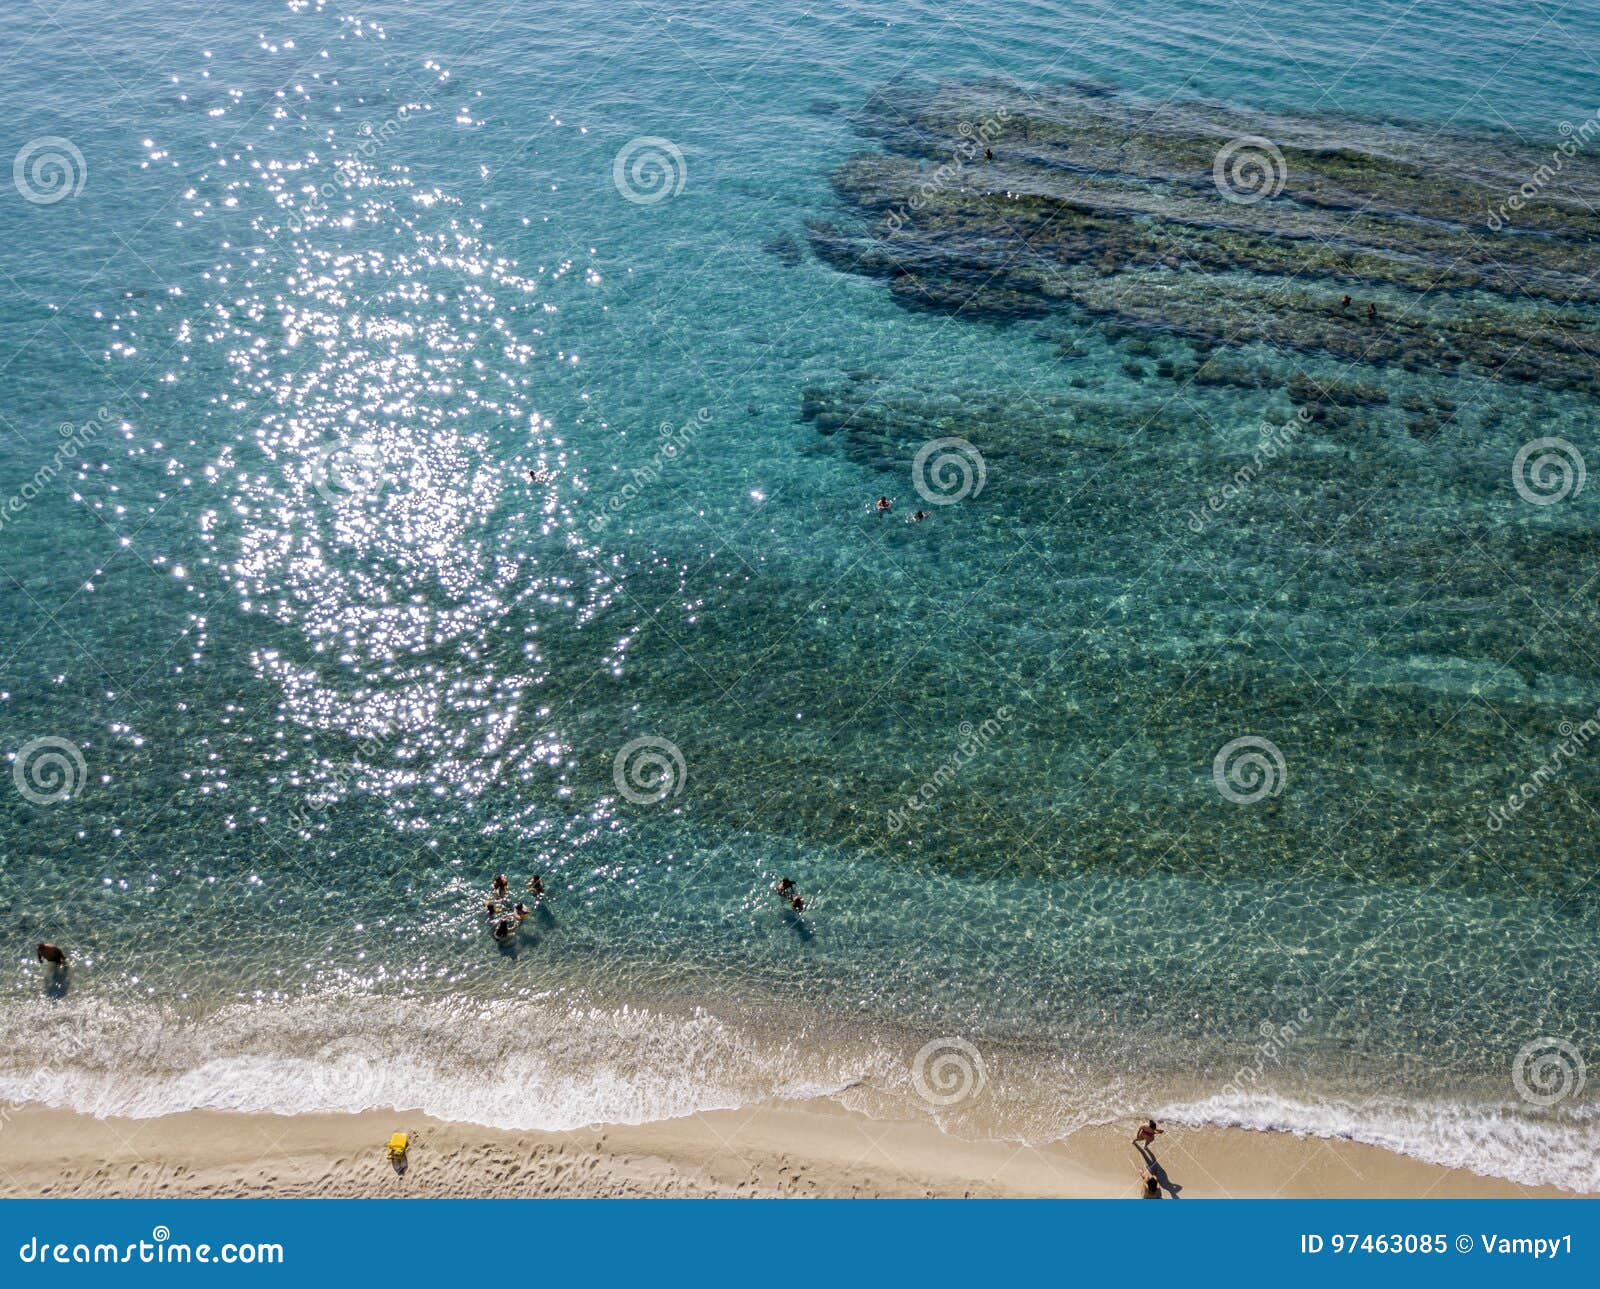 Swimmers, Bathers Floating on the Water. Aerial View Stock Image ...